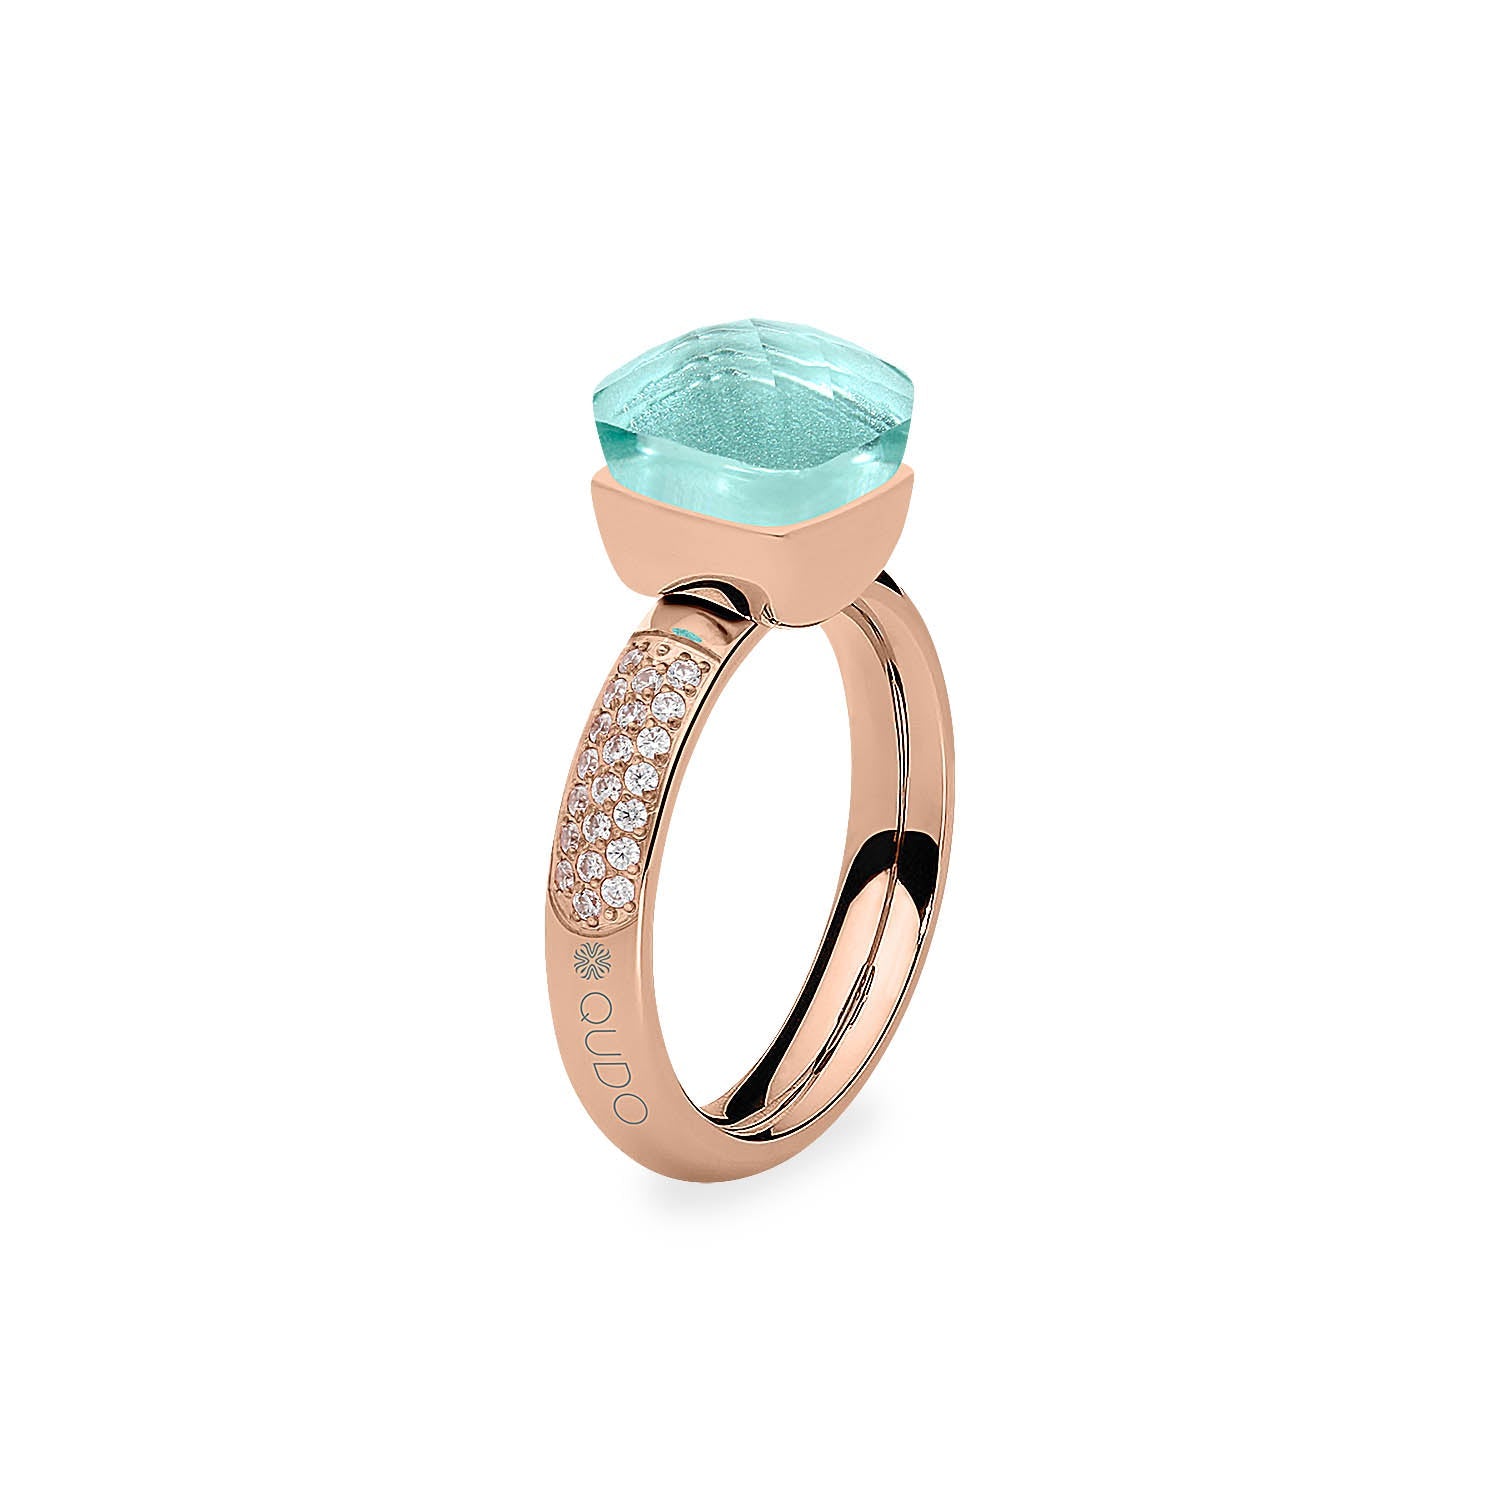 Firenze Deluxe Ring - Shades of Blue - Roségold